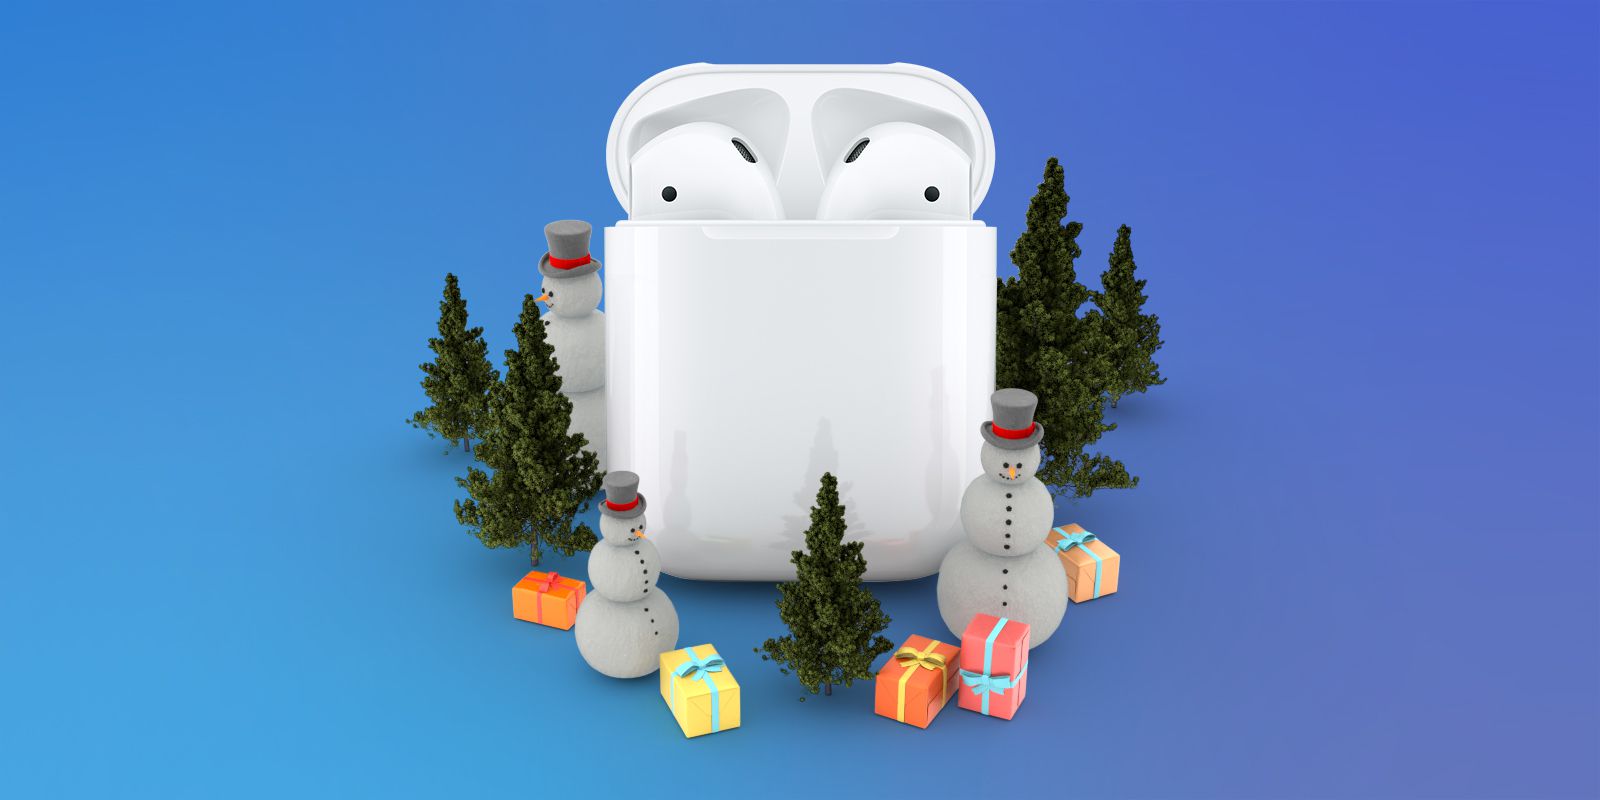 Black Friday Spotlight: Walmart Drops AirPods 2 to All-Time Low Price of $89